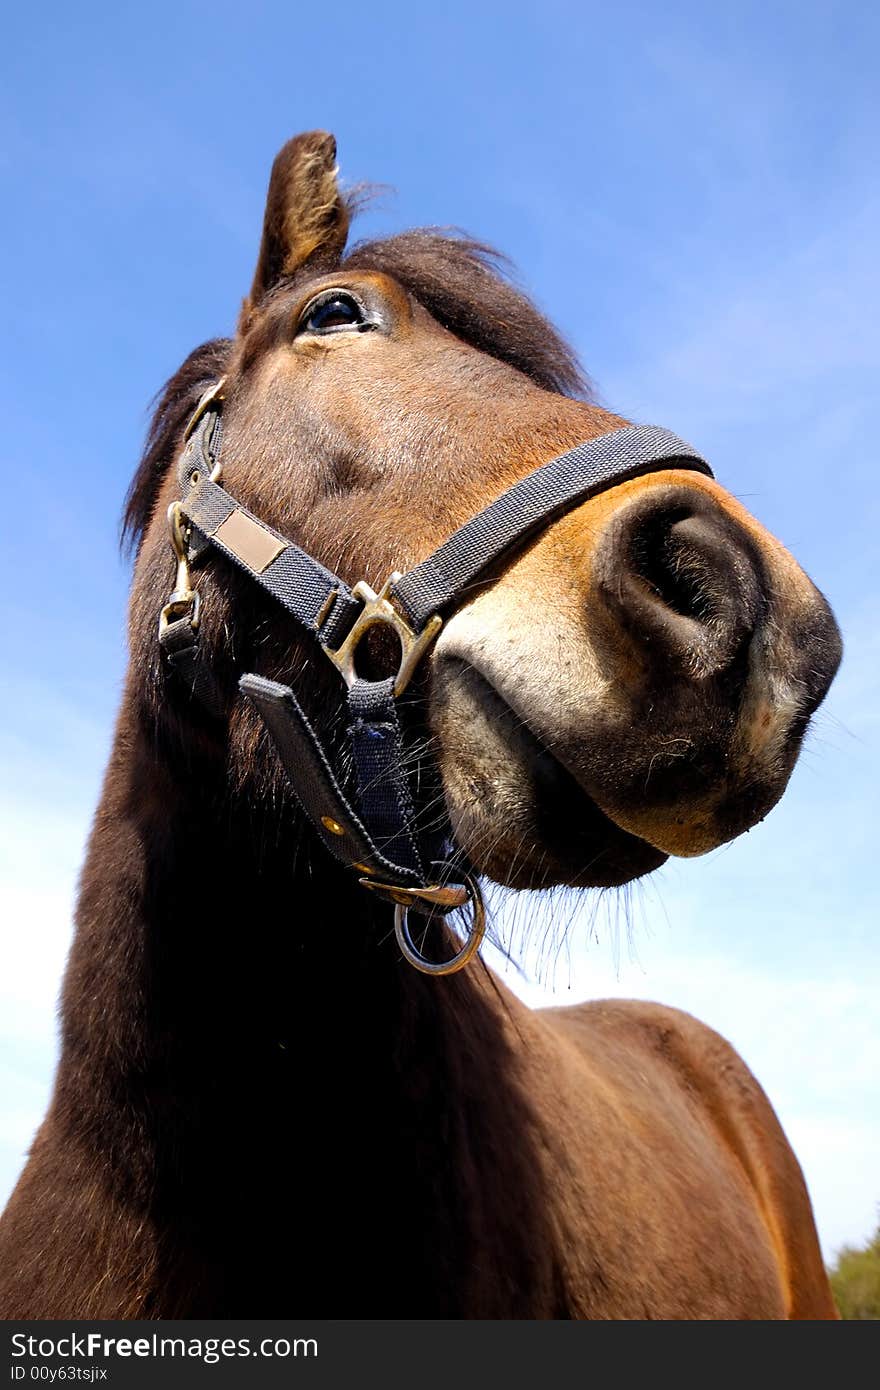 Wide angle shot of horse face. The horse is looking very curious. Wide angle shot of horse face. The horse is looking very curious.